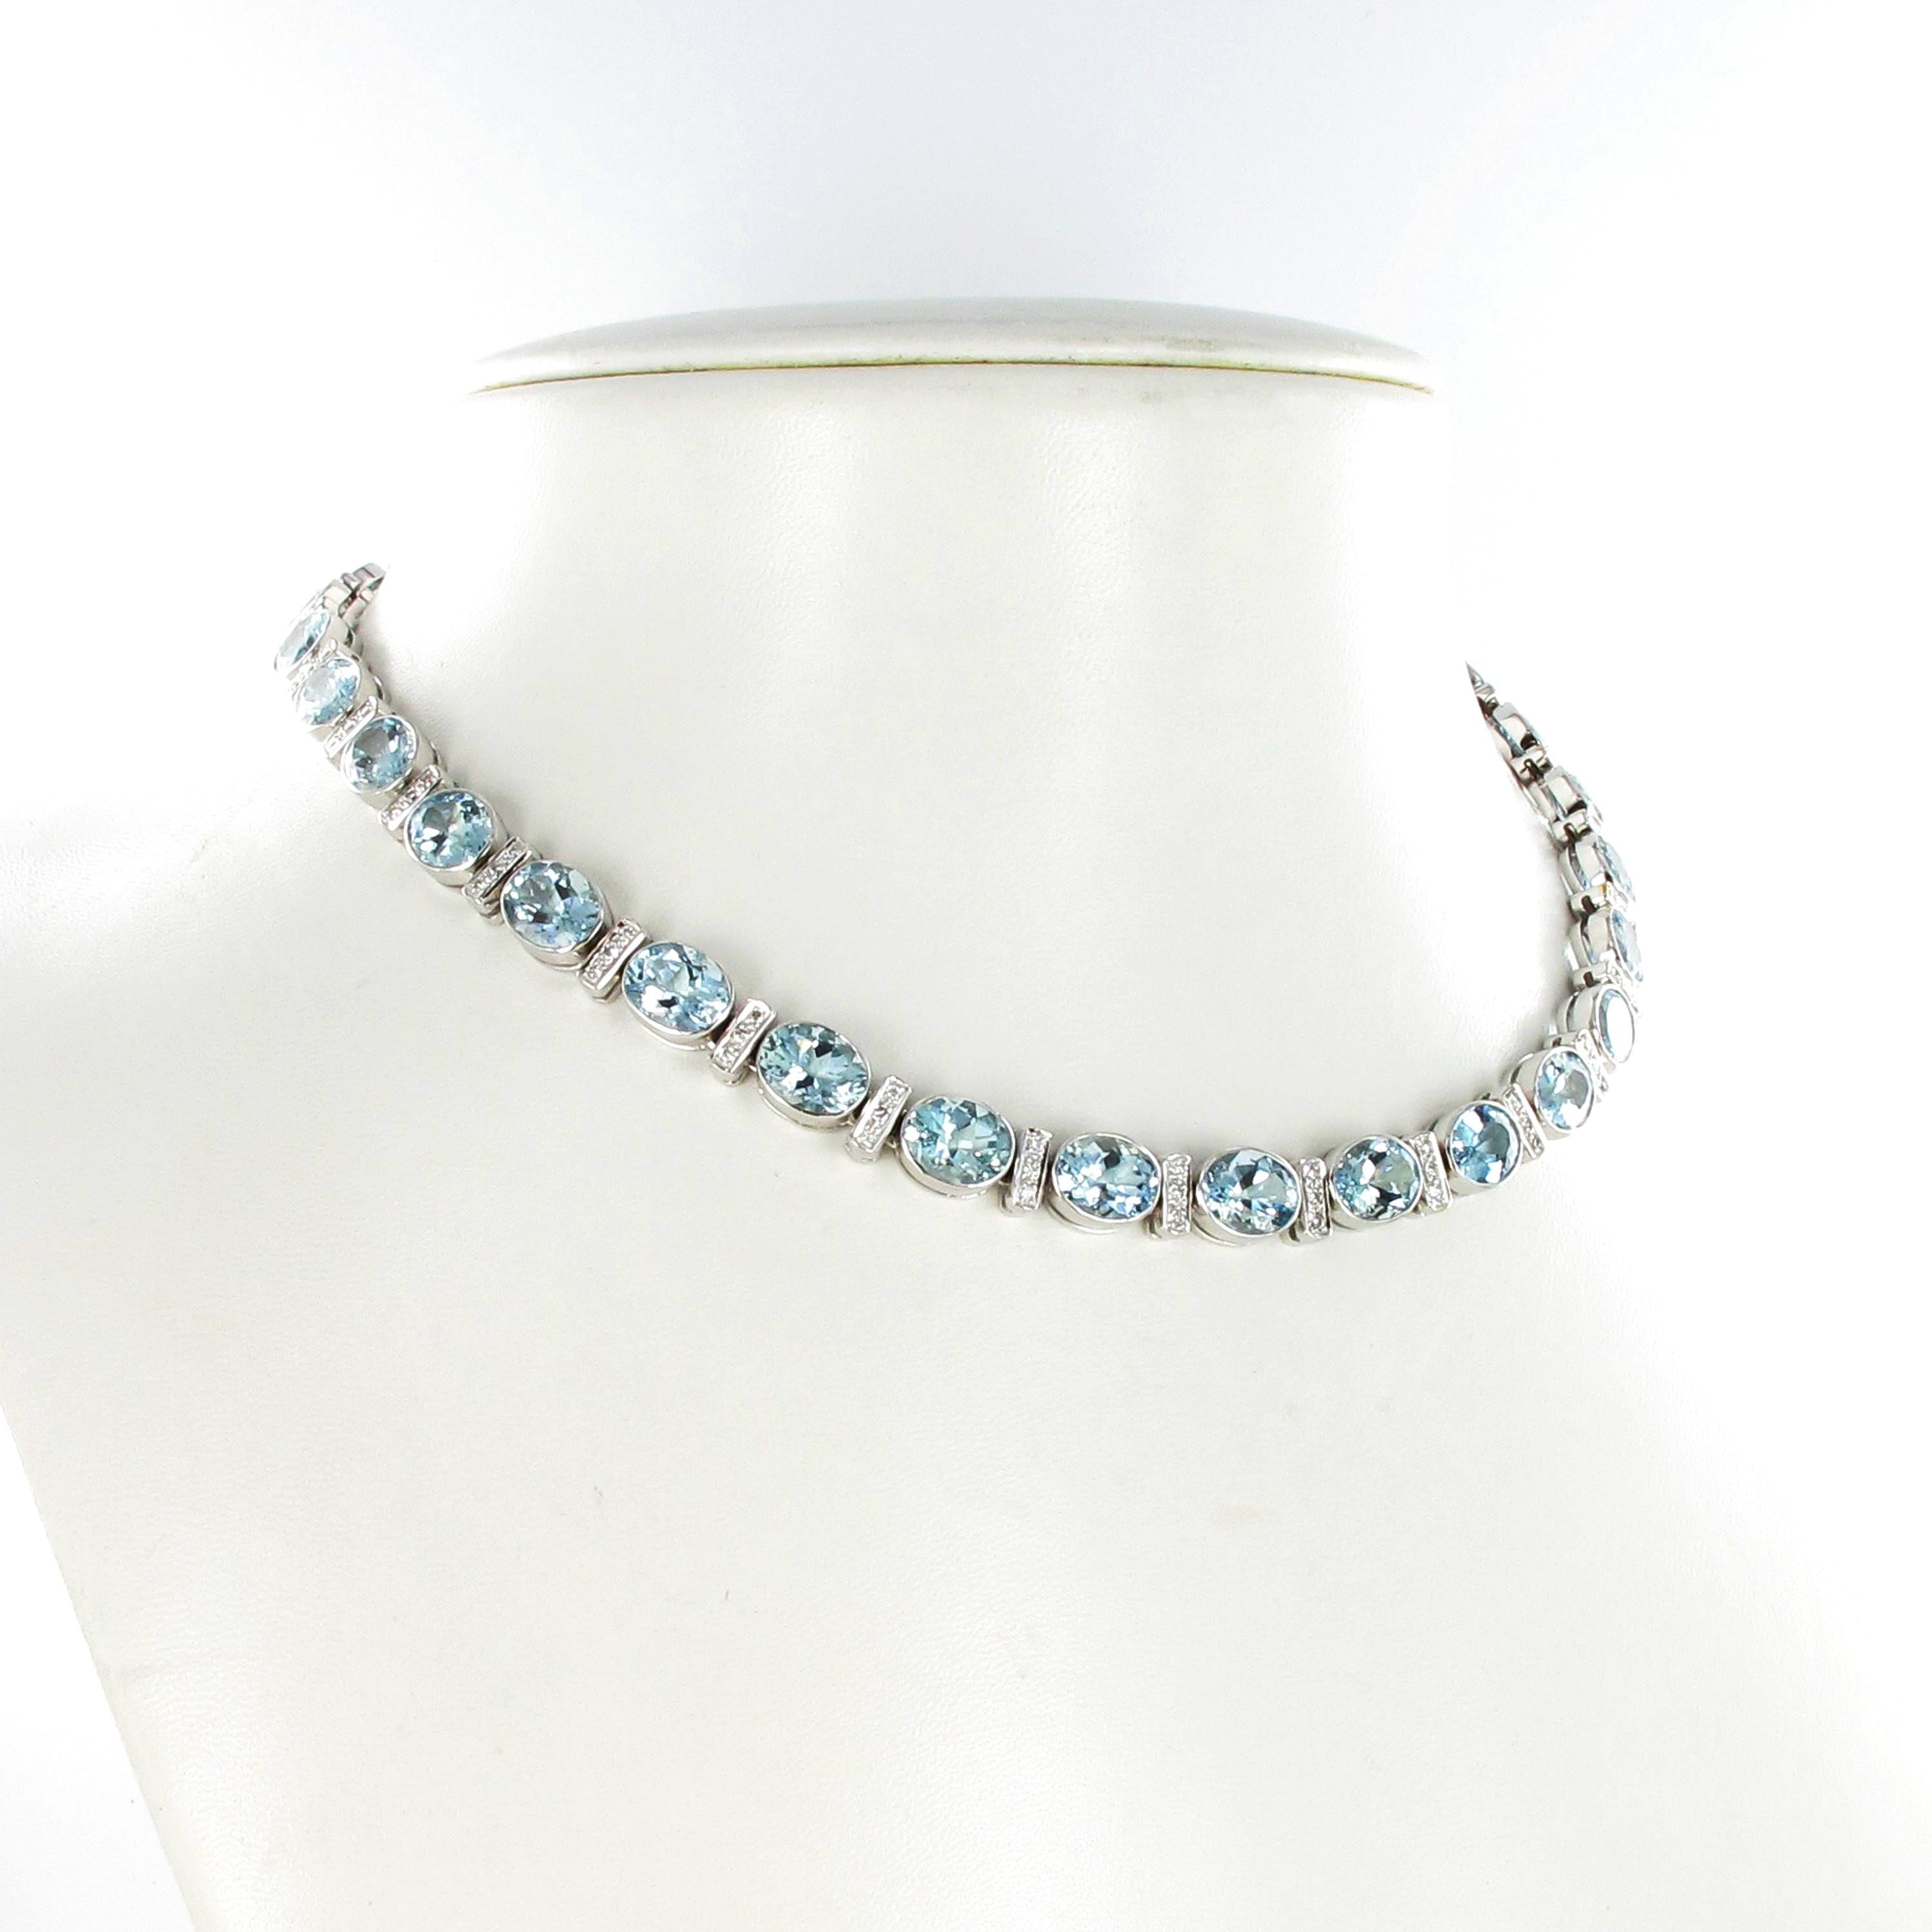 This classic and timeless necklace in 18 karat white gold is bezel set with 31 oval cut aquamarines of soft blue colour and with a total weight of approximately 49.60 carats. The aquamarines are separated by fine bars, each set with 3 brilliant cut